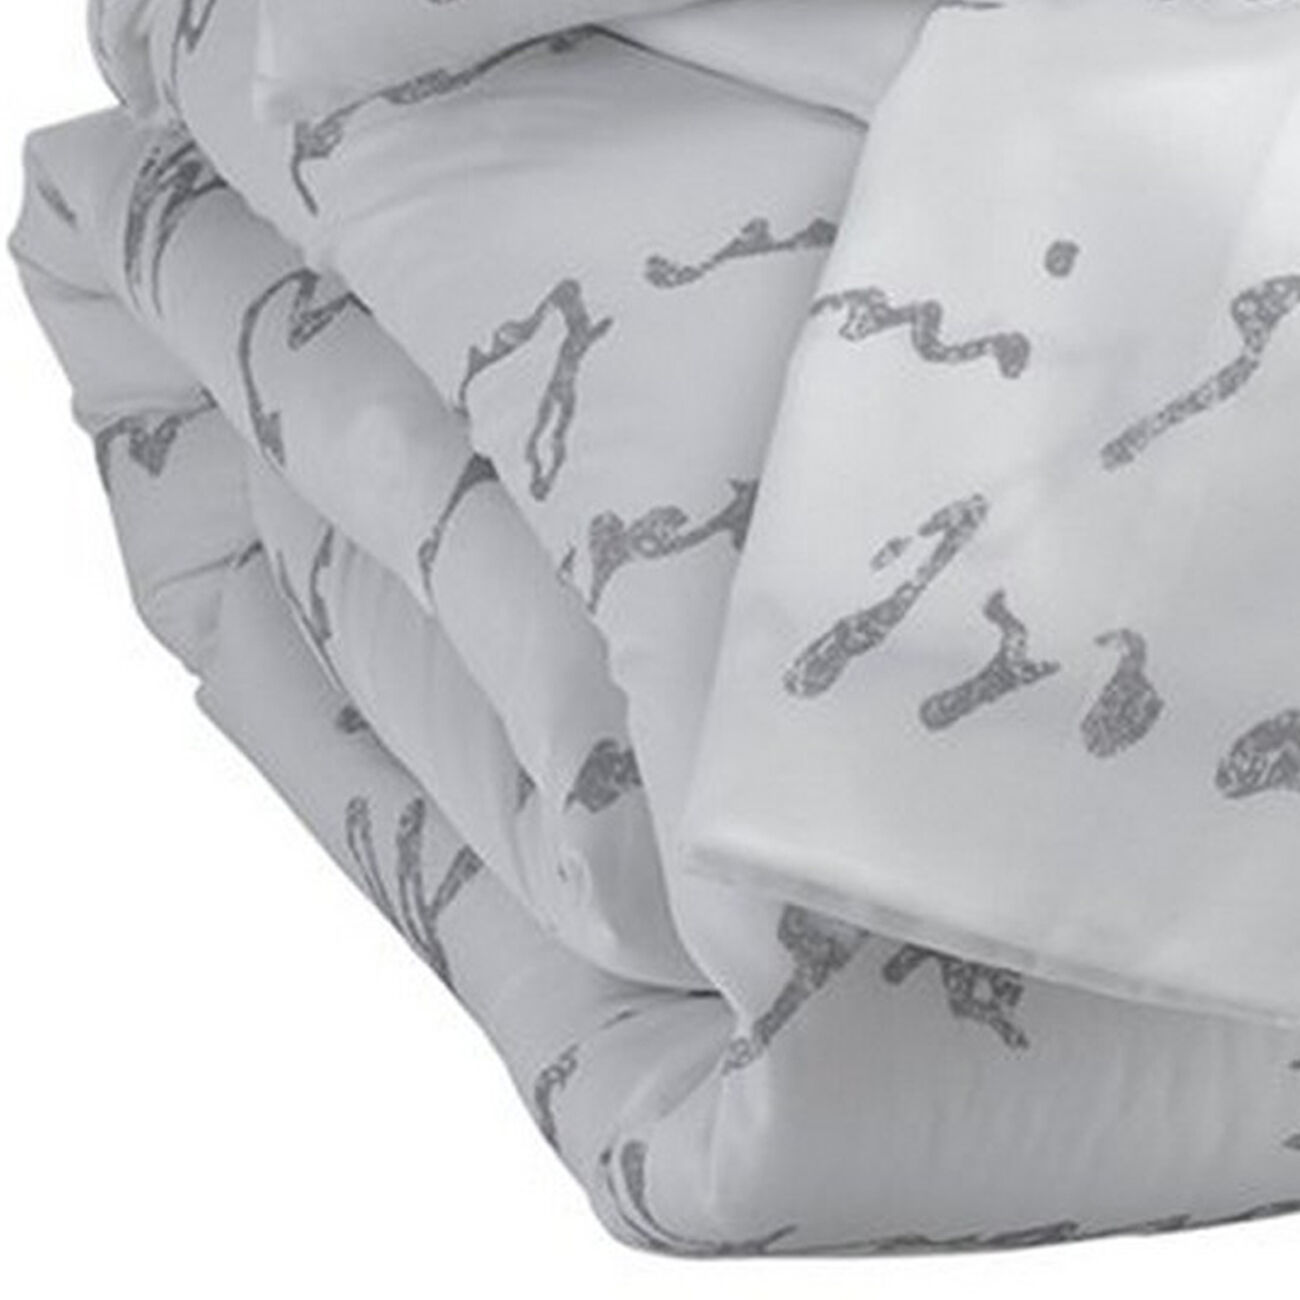 3 Piece Fabric Queen Comforter Set with Script Print, White and Gray